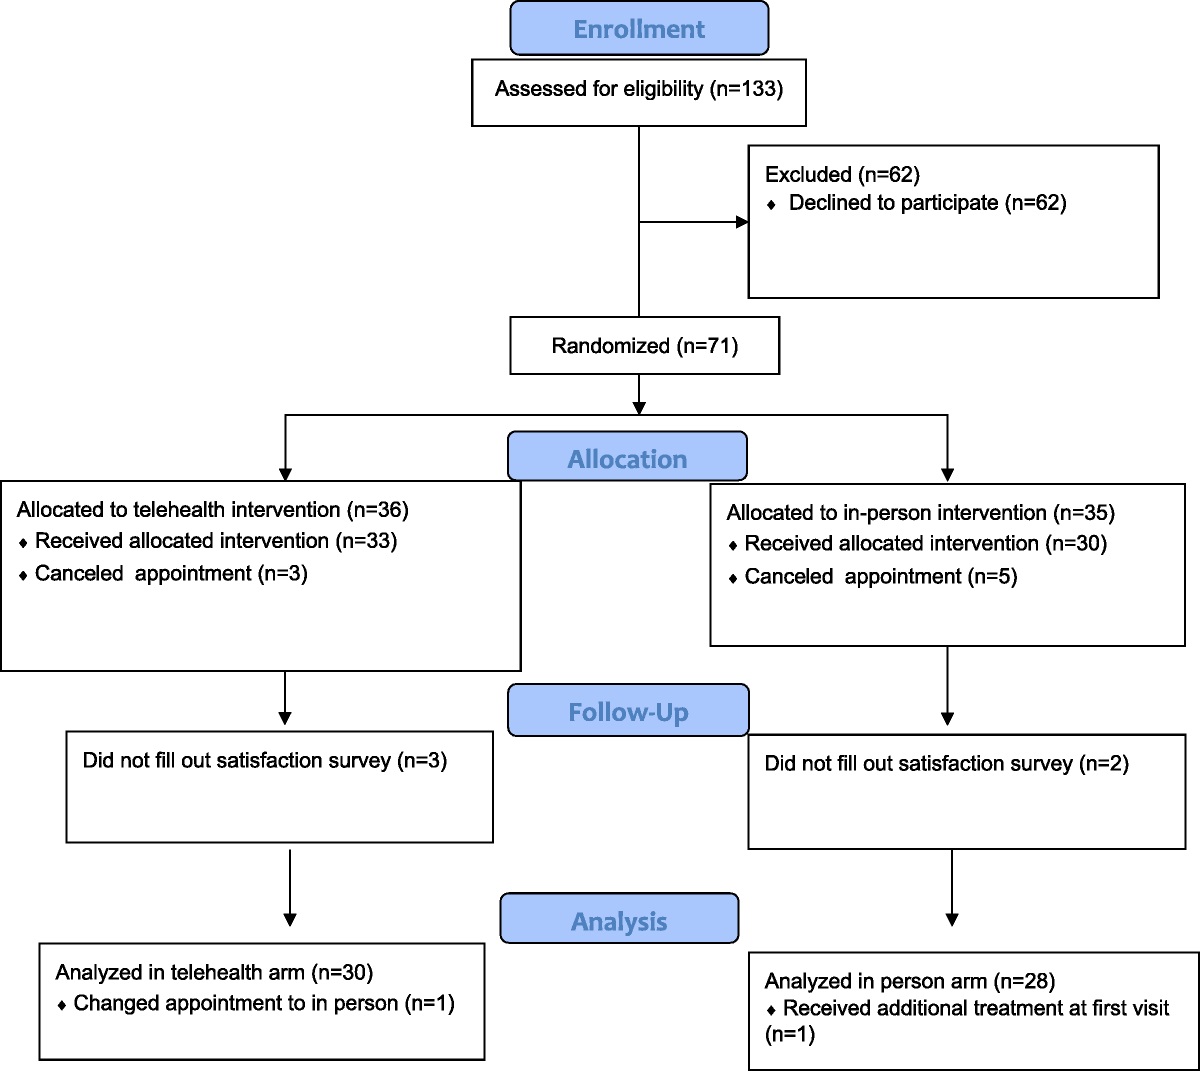 Patient Satisfaction With Telehealth Visits for New Patient Appointments for Pelvic Floor Disorders: A Randomized Trial of Telehealth Versus Standard In-Person Office Visits